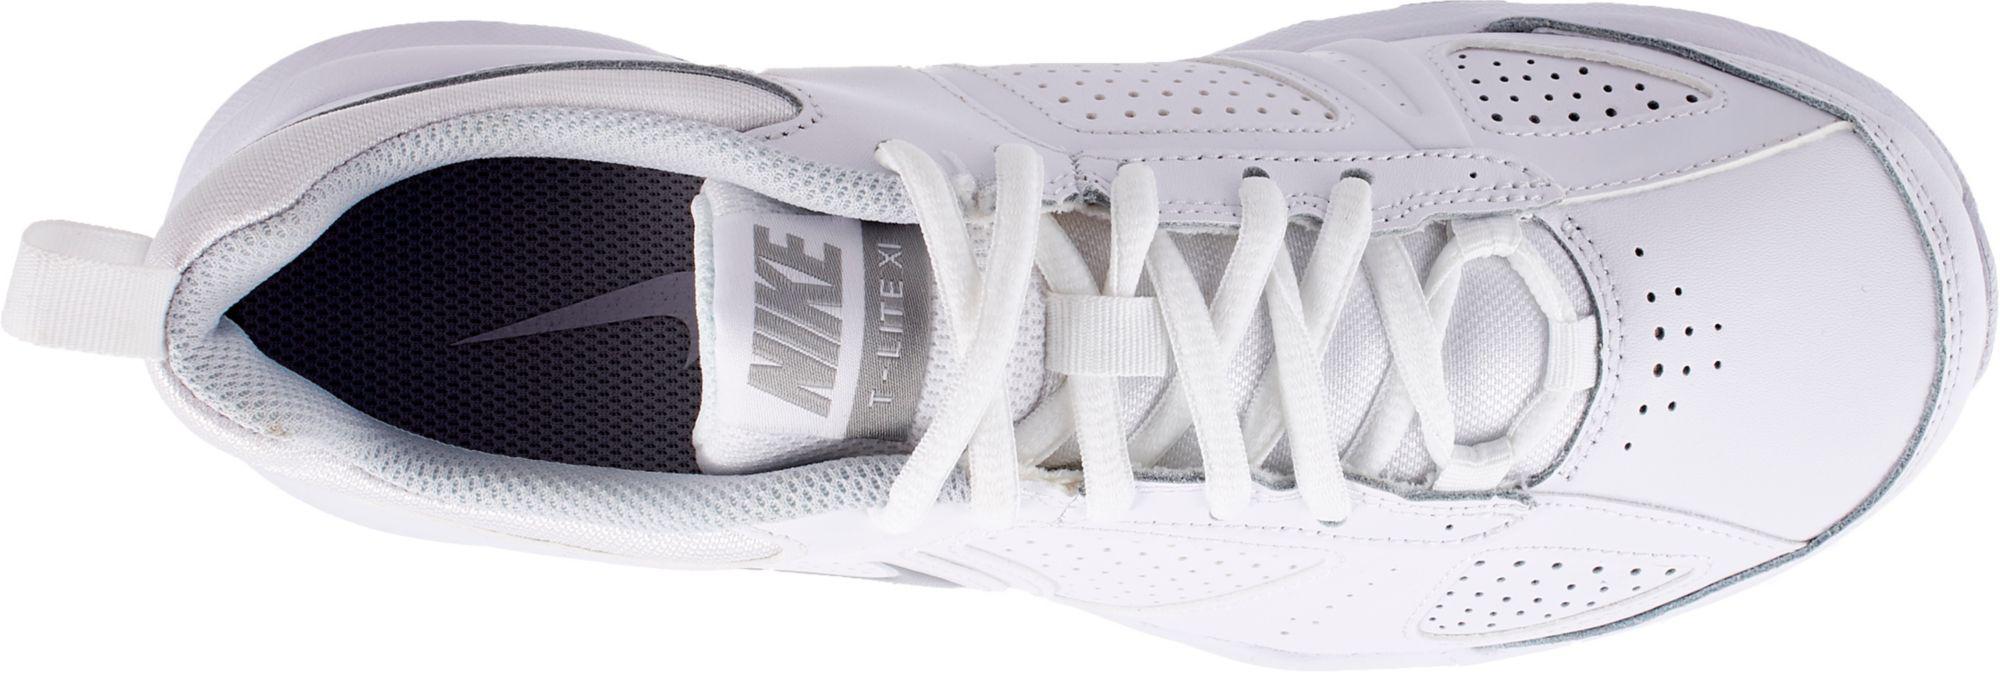 Nike Leather T-lite Xi Training Shoes in White/Grey (White) | Lyst